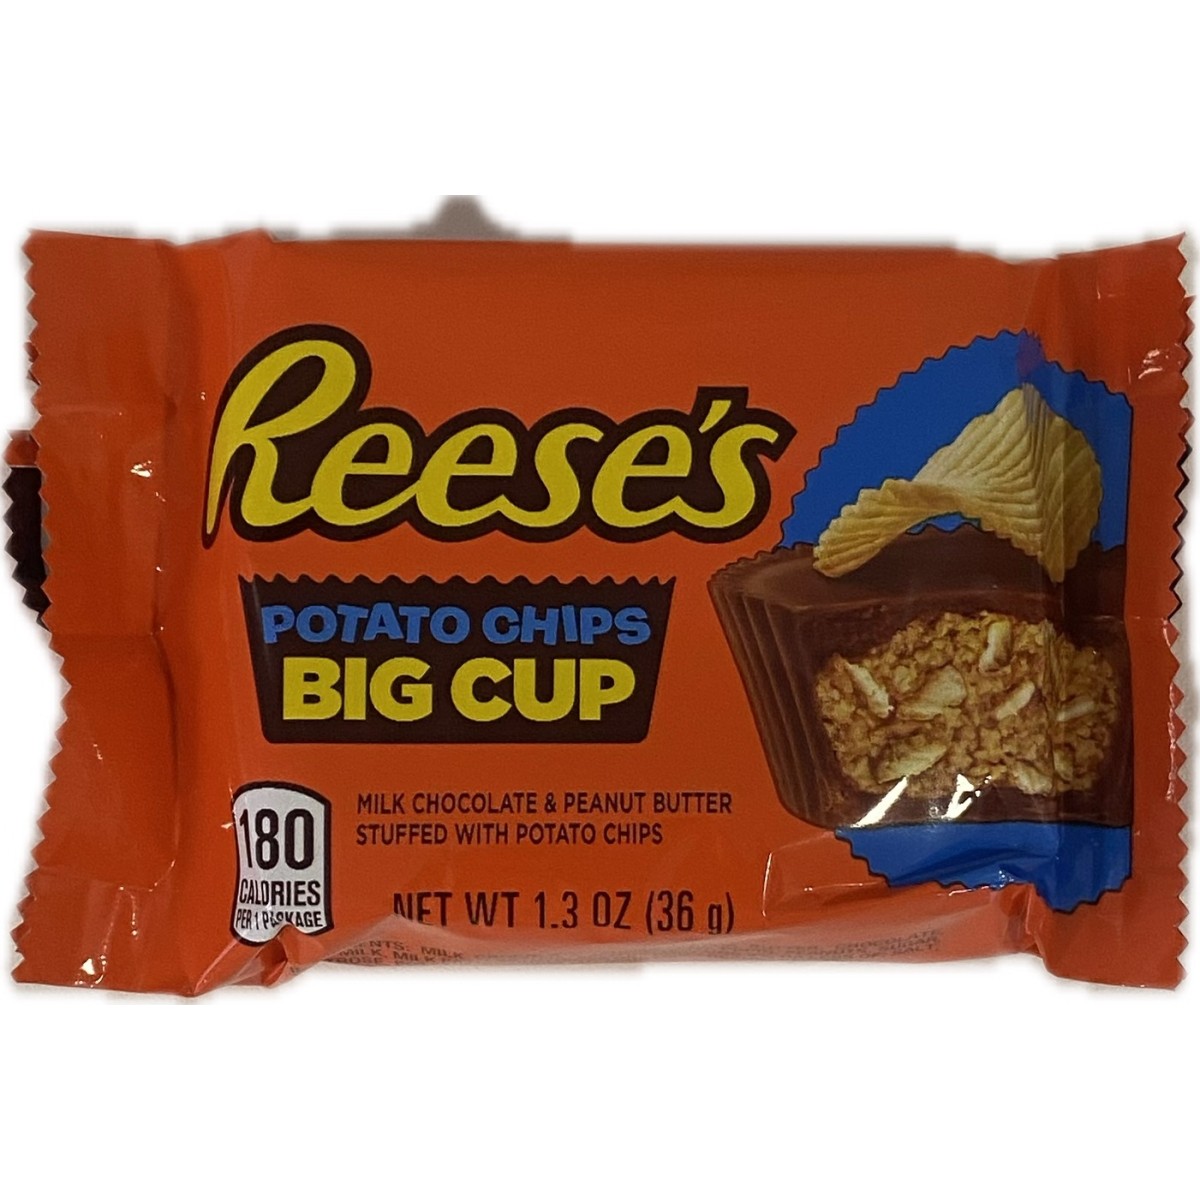 Reese's big cup potato chips